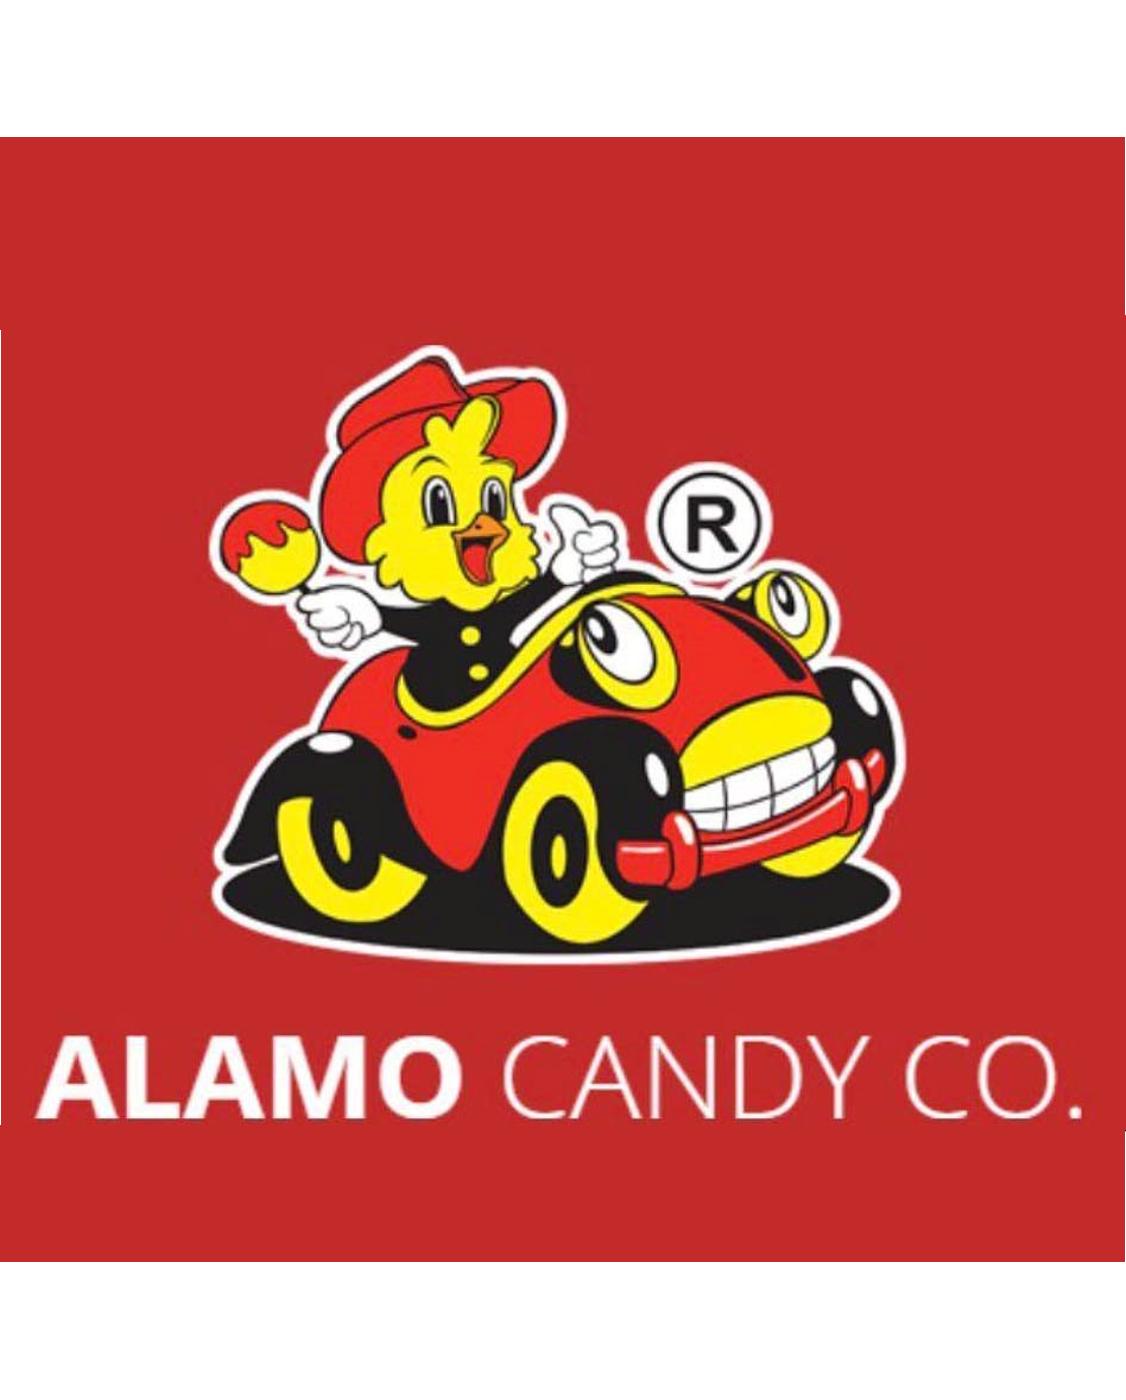 Alamo Candy Saladito Dried Salted Plums Chinese Candy; image 2 of 2